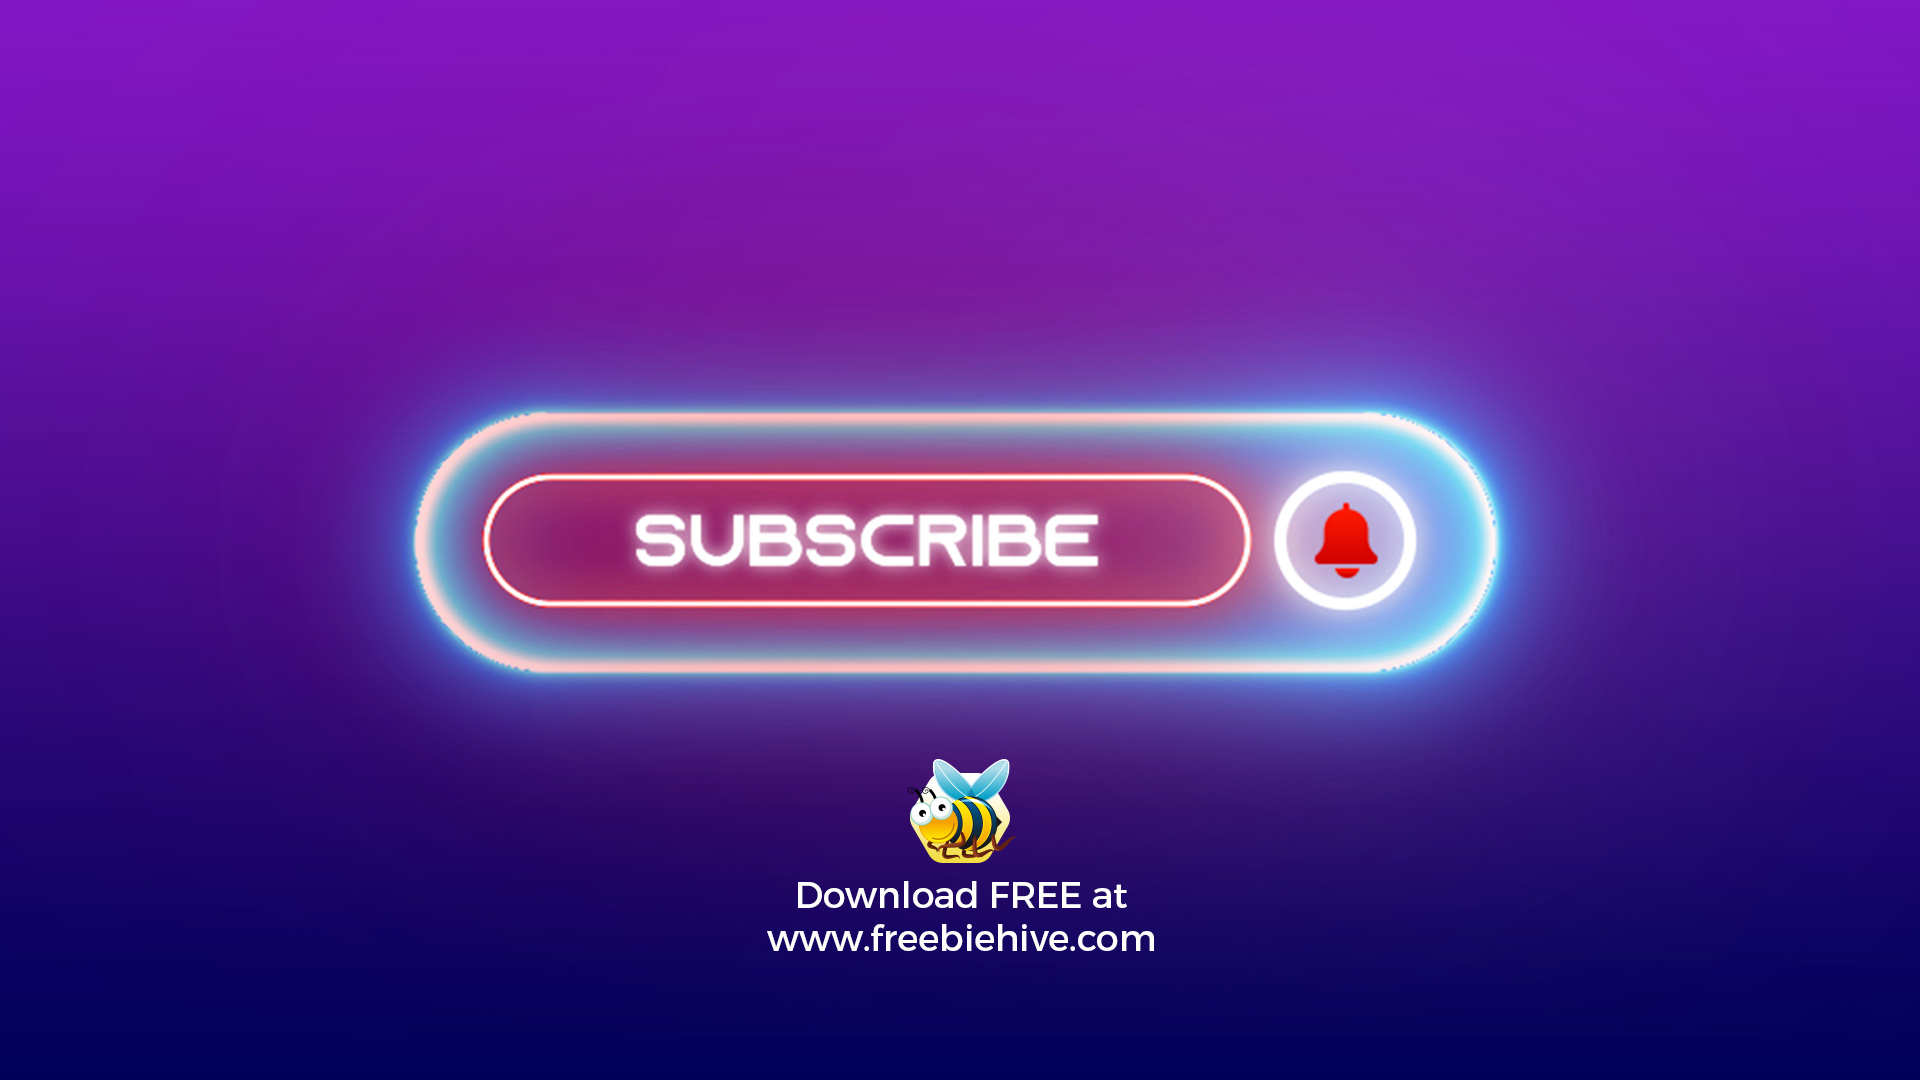 Download Neon youtube subscribe button - Freebiehive